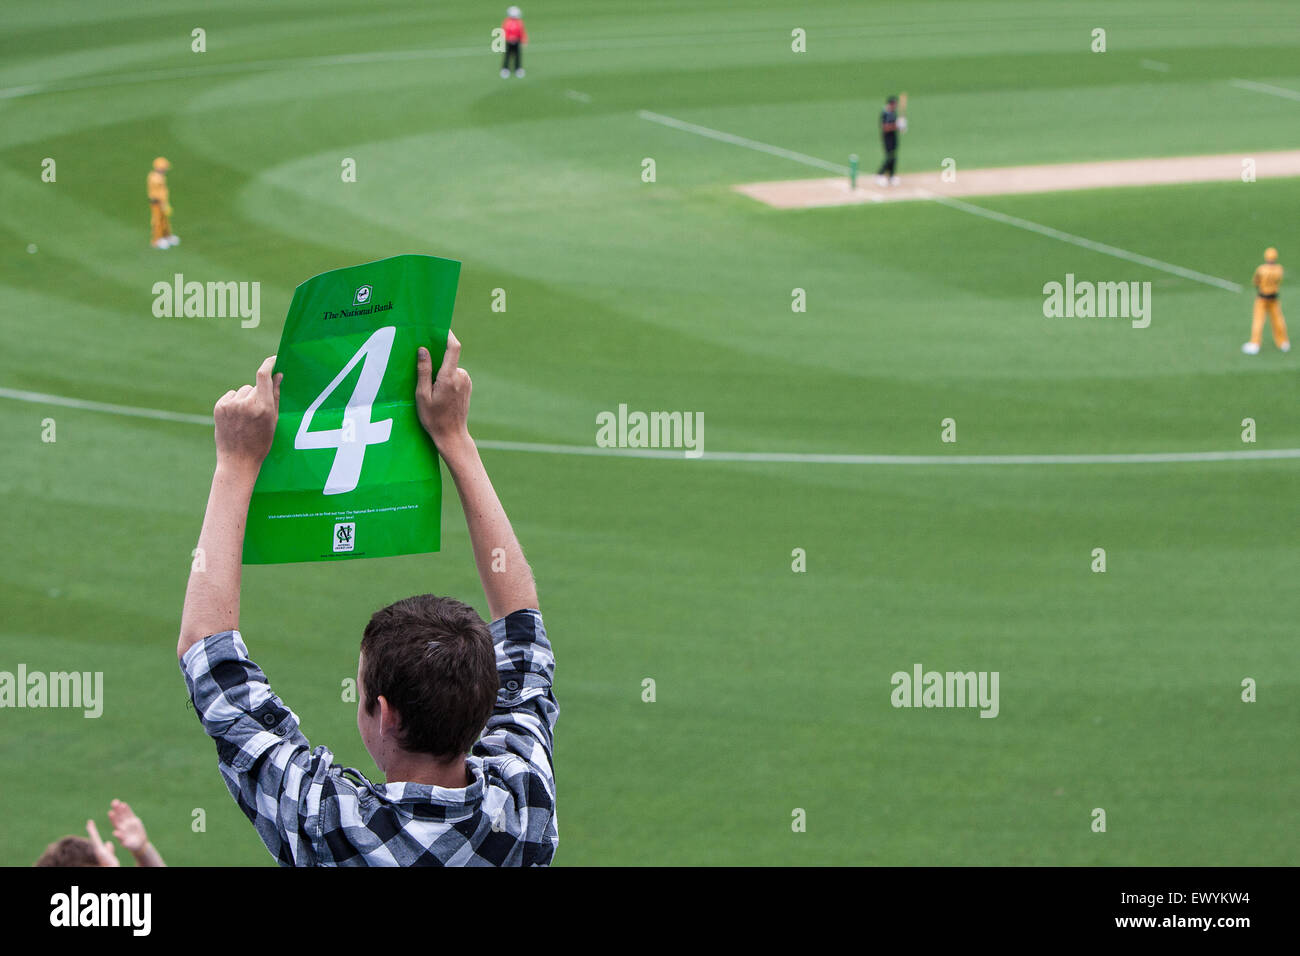 New Zealand cricket team,Black Caps score four runs against Australia in a  one day match at Eden Park,Auckland,New Zealand Stock Photo - Alamy